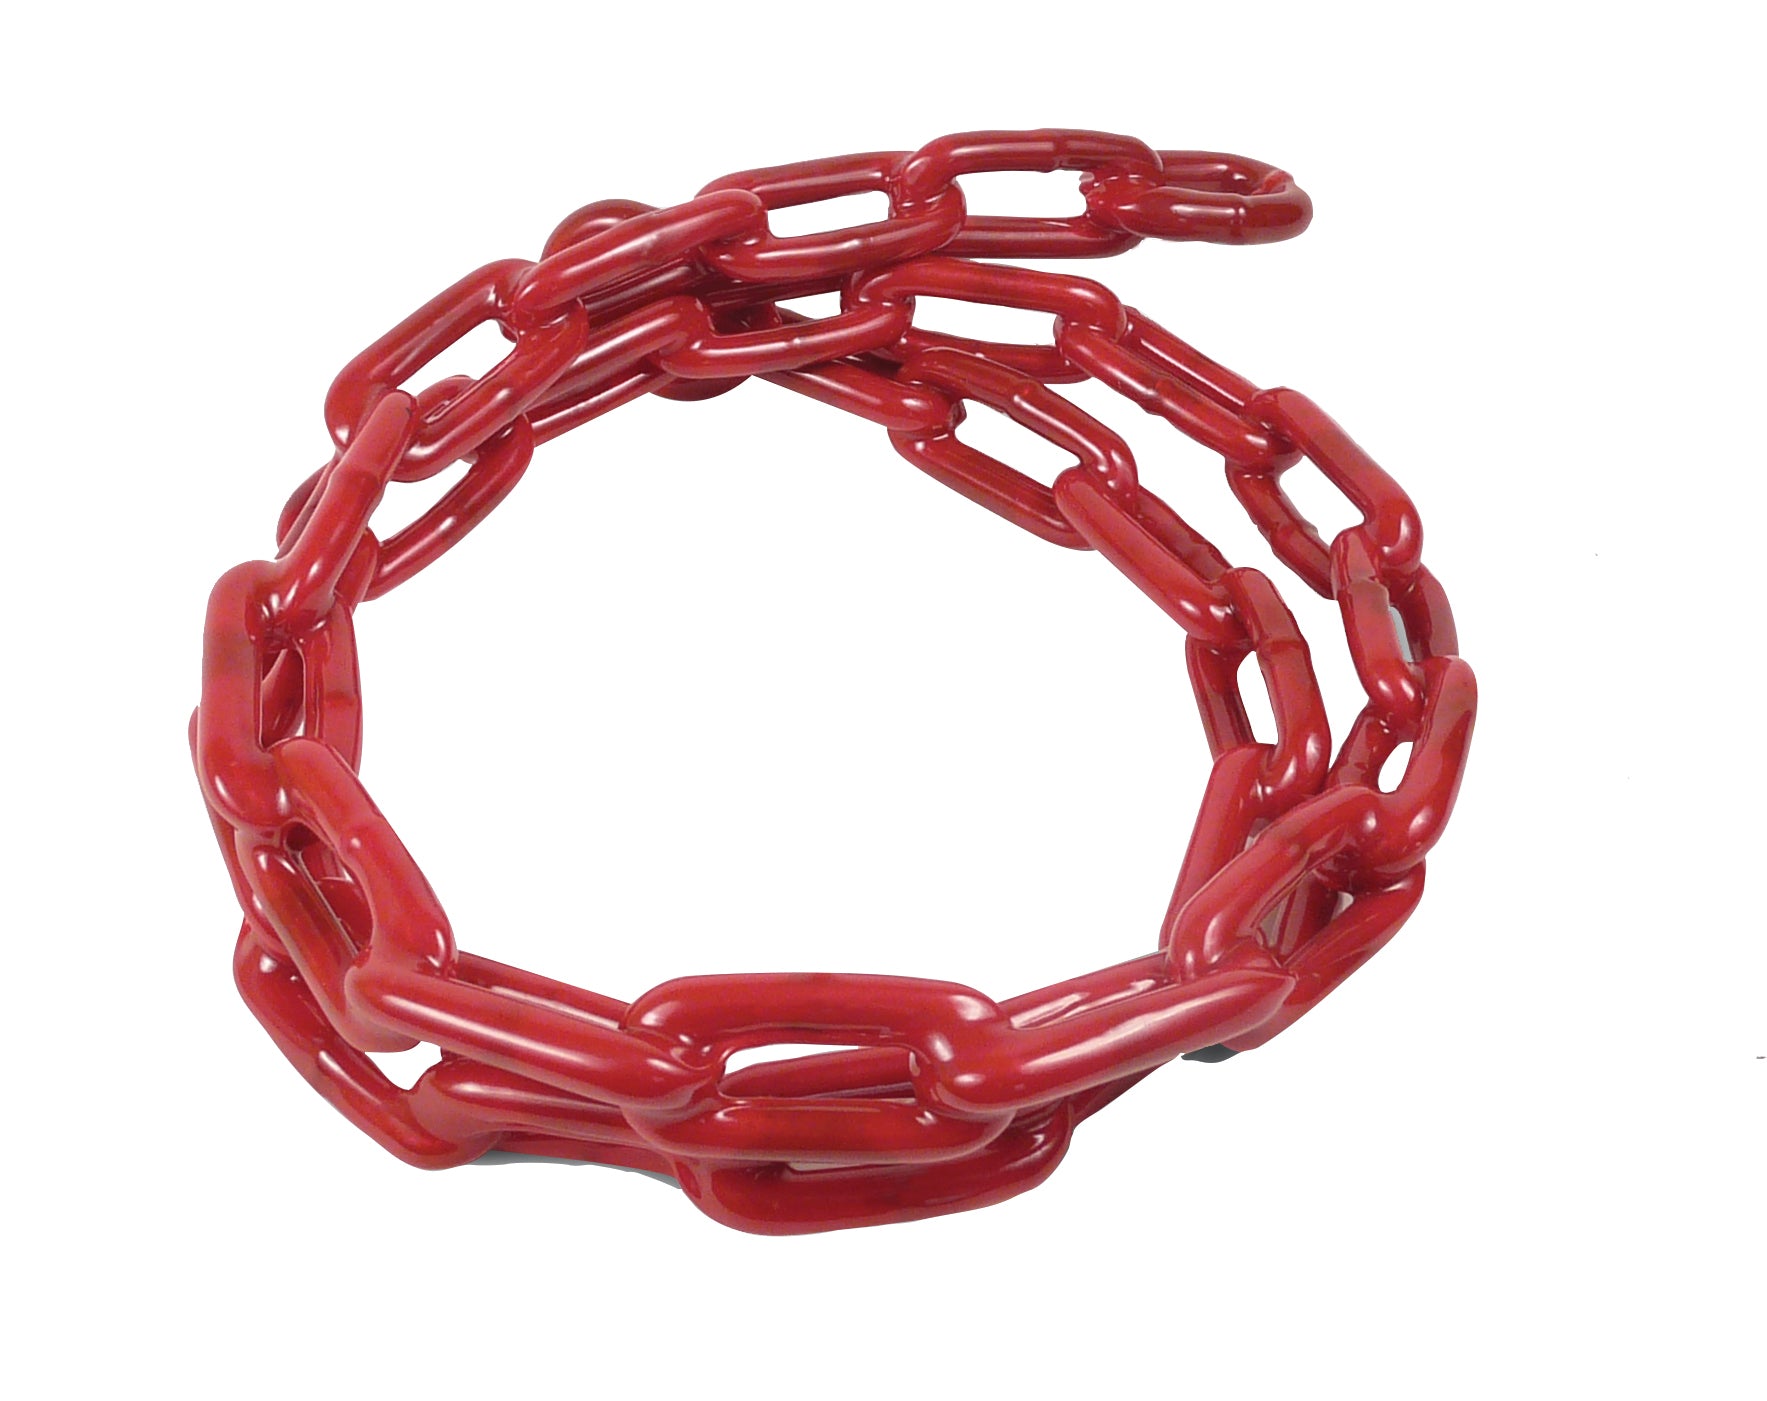 Greenfield 2115-RD PVC Coated Anchor Chain - Red, 1/4" x 4'